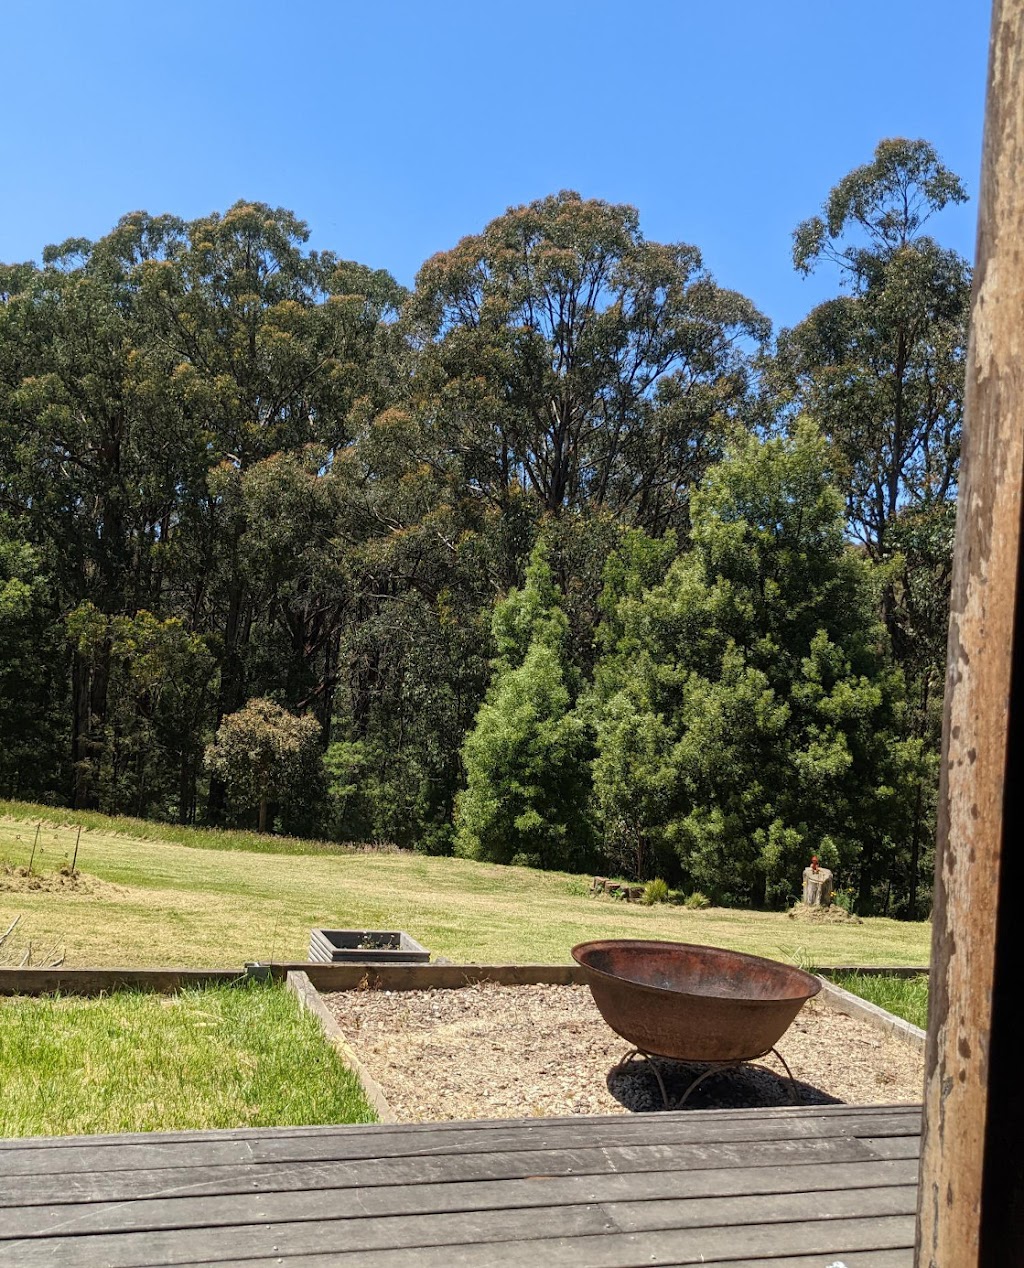 The Masked Owl Retreat | lodging | 73 Grant St, Forrest VIC 3236, Australia | 0401328025 OR +61 401 328 025